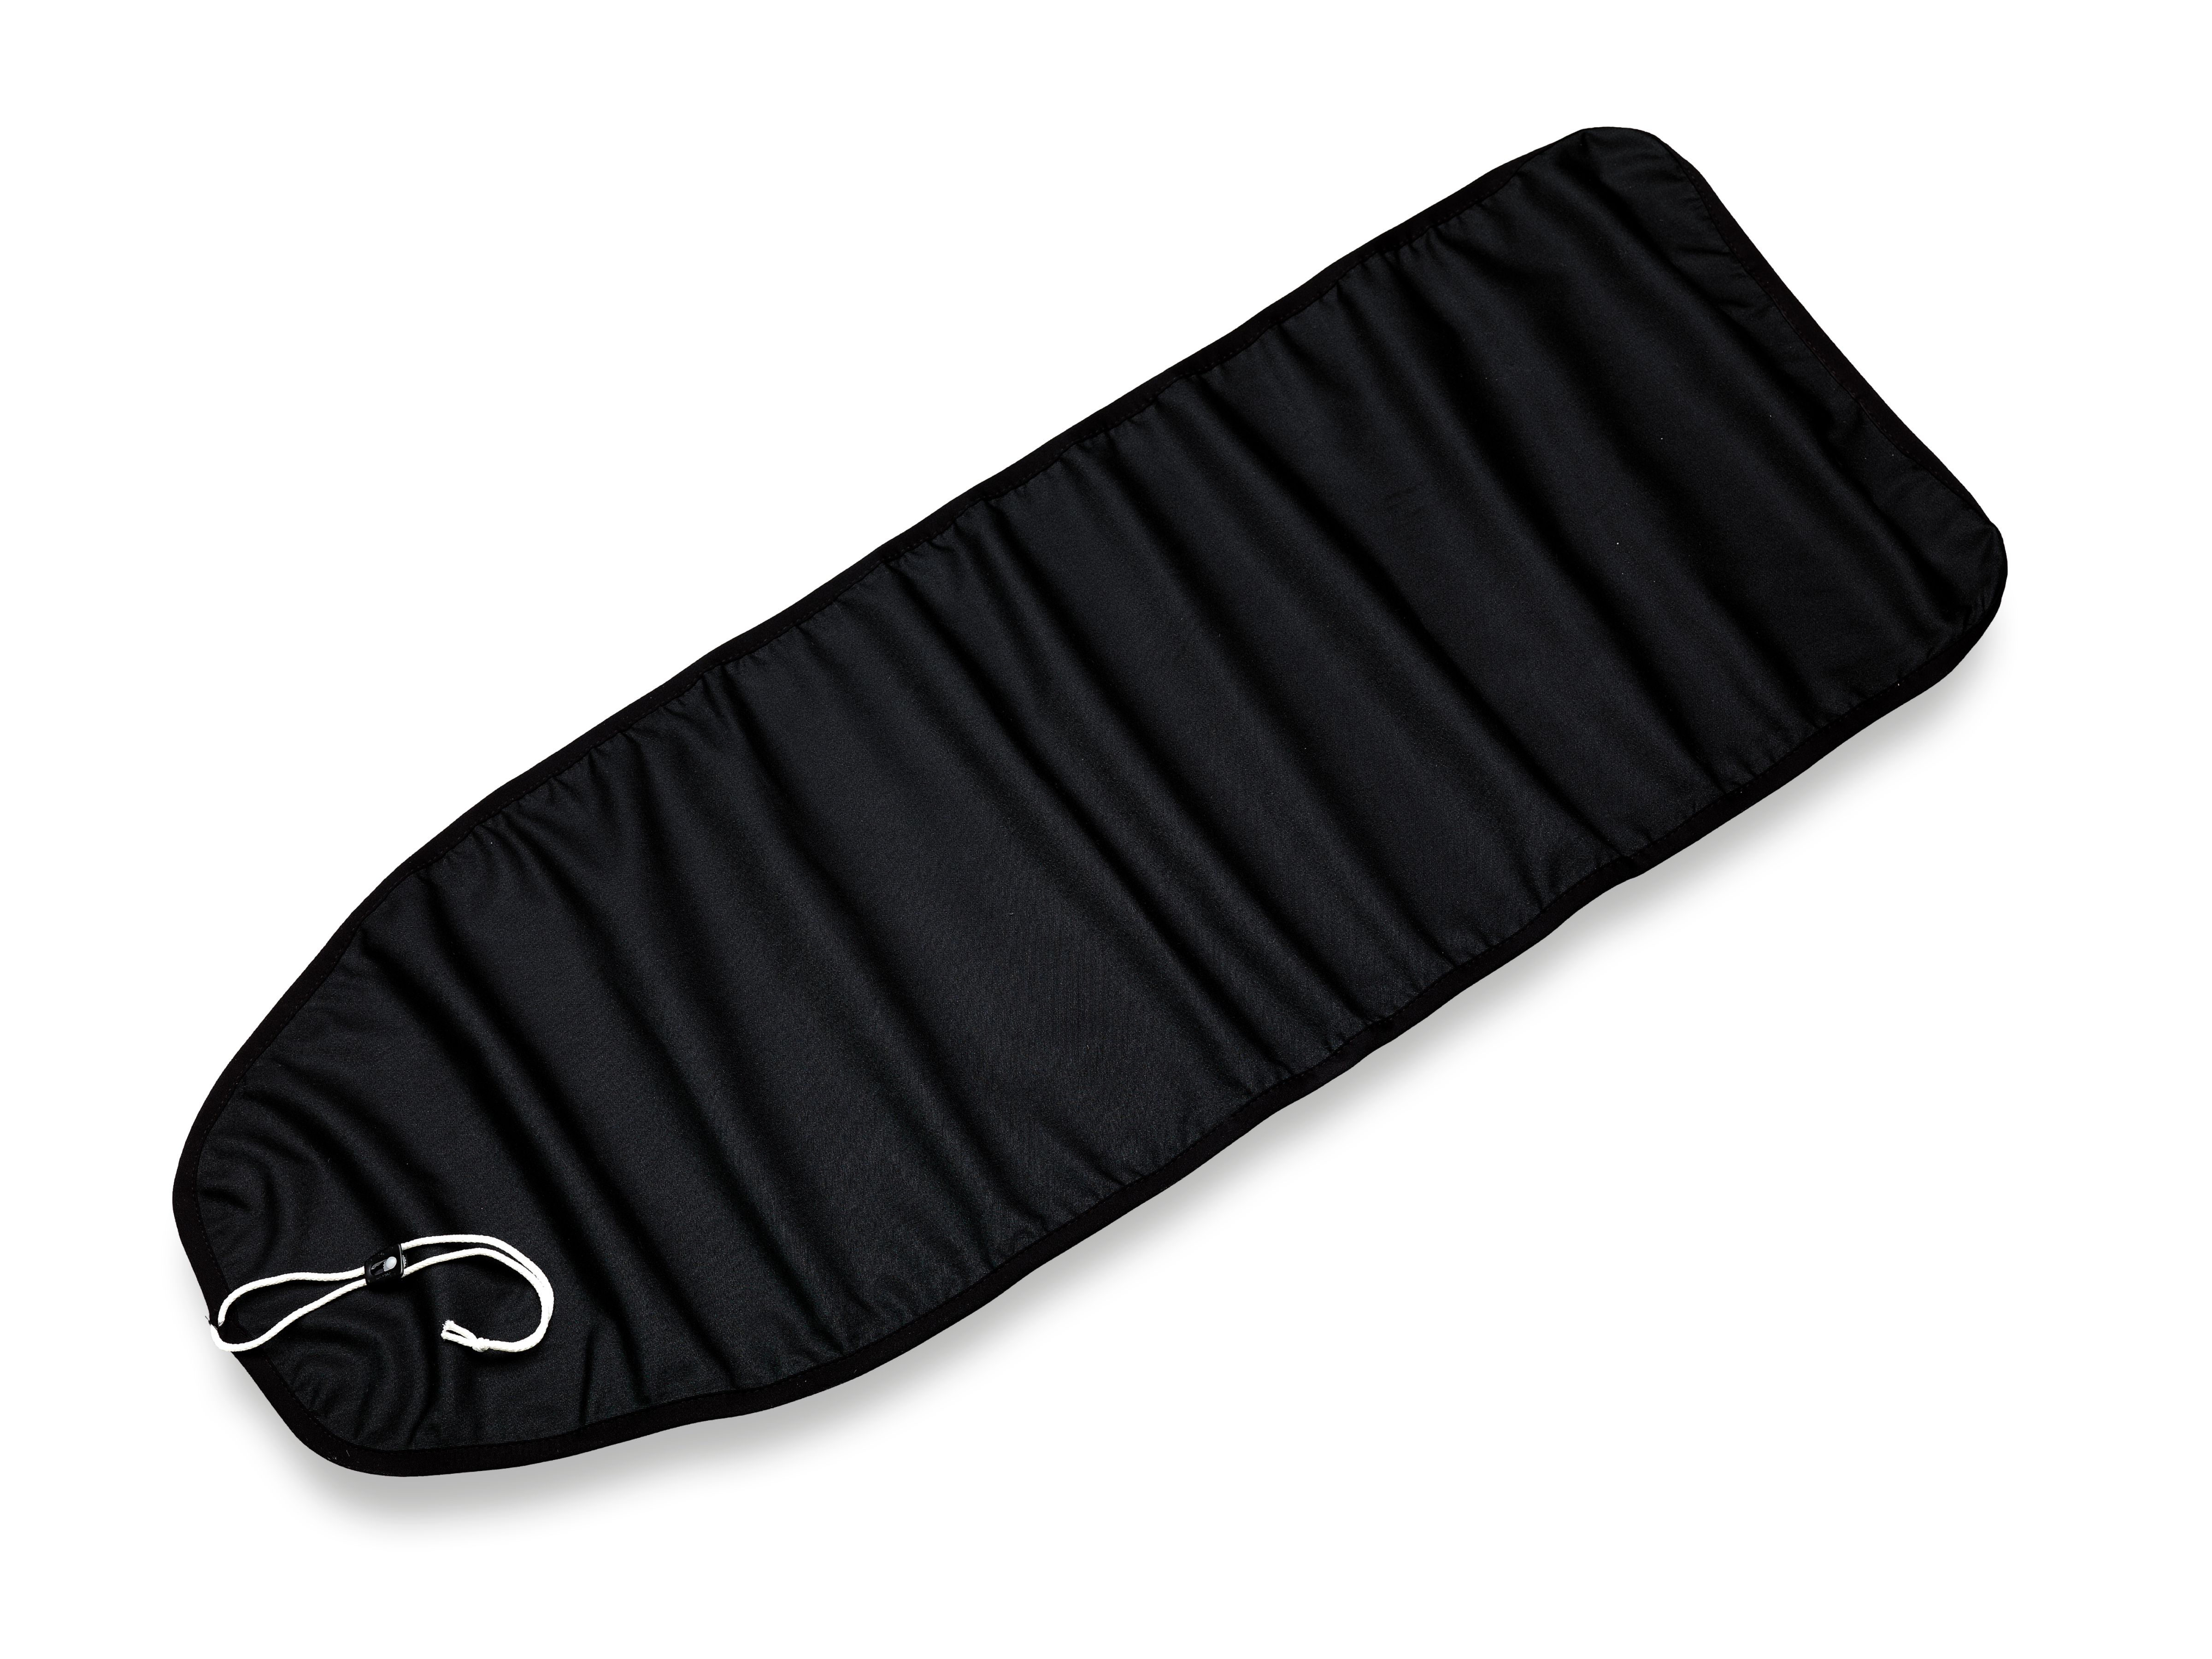 Ironing board cover black